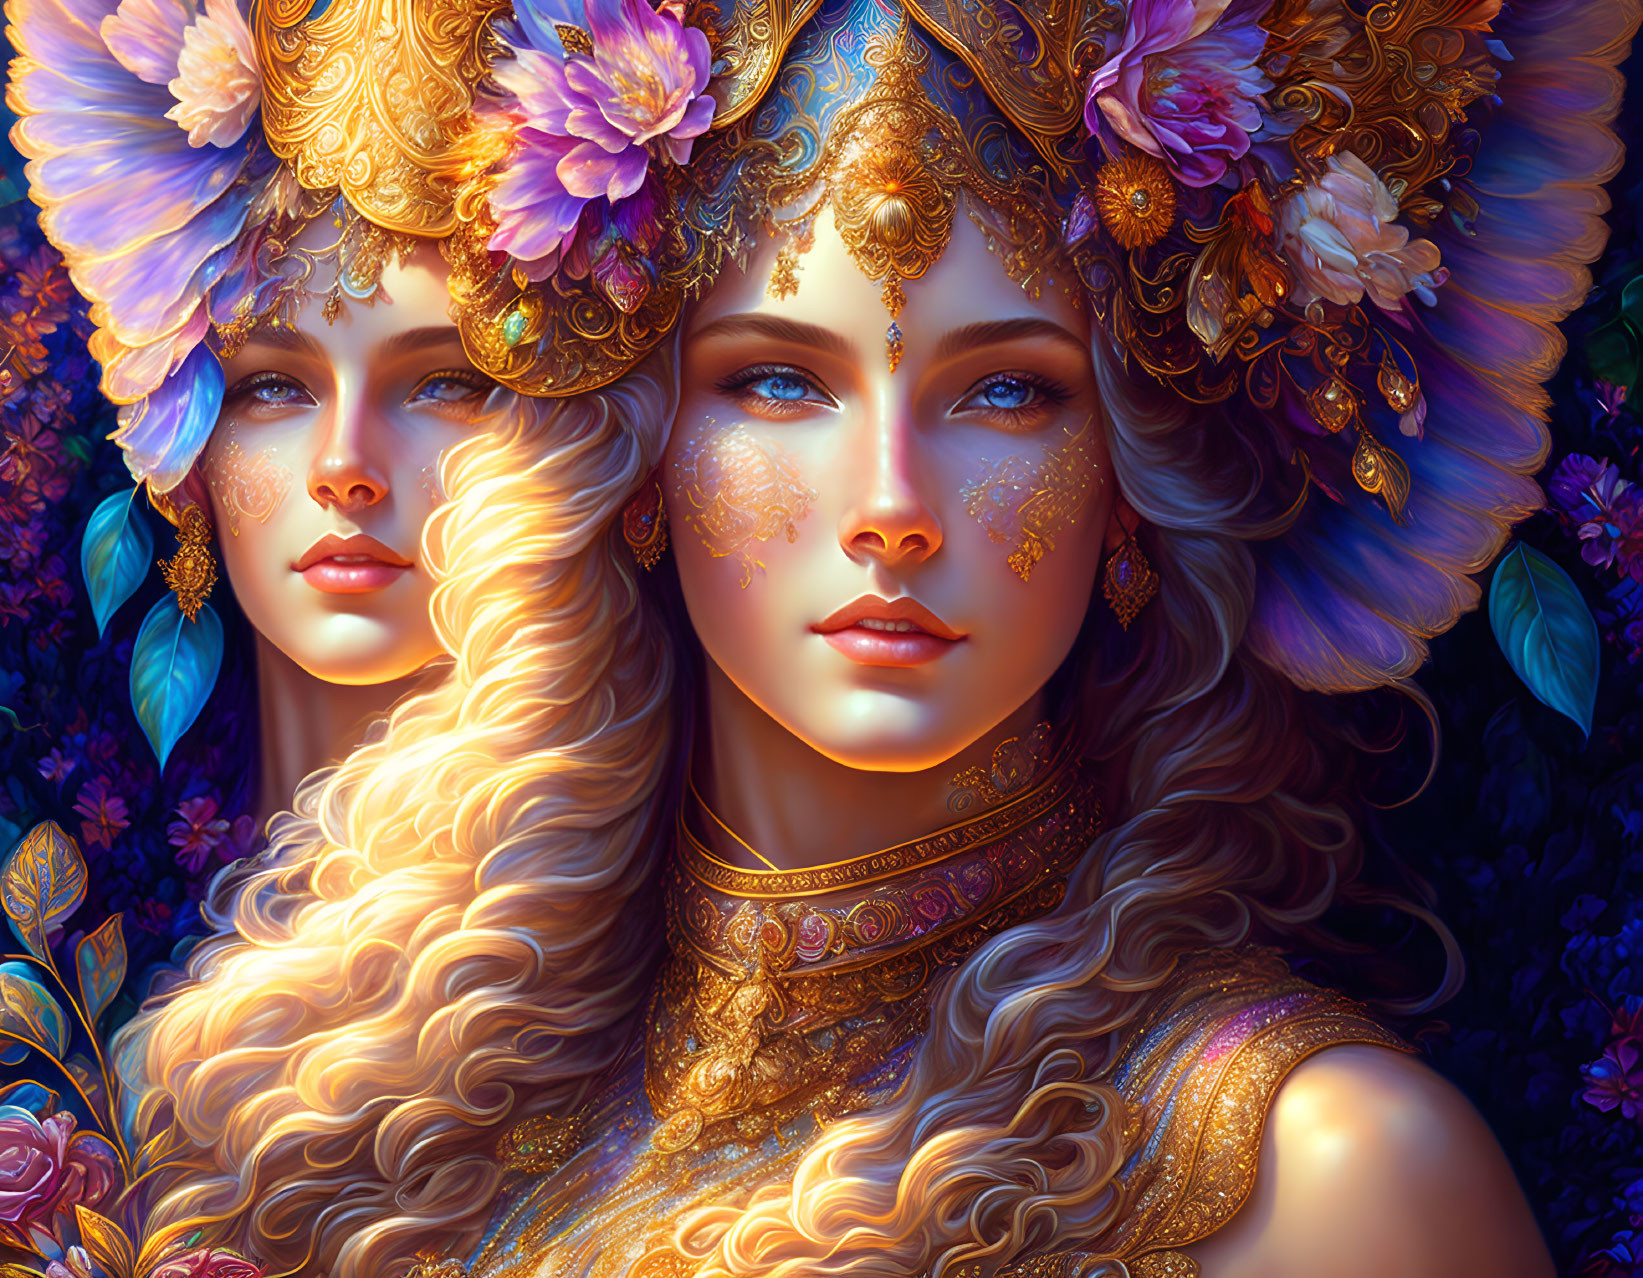 Ethereal women with golden headdresses in lush flora